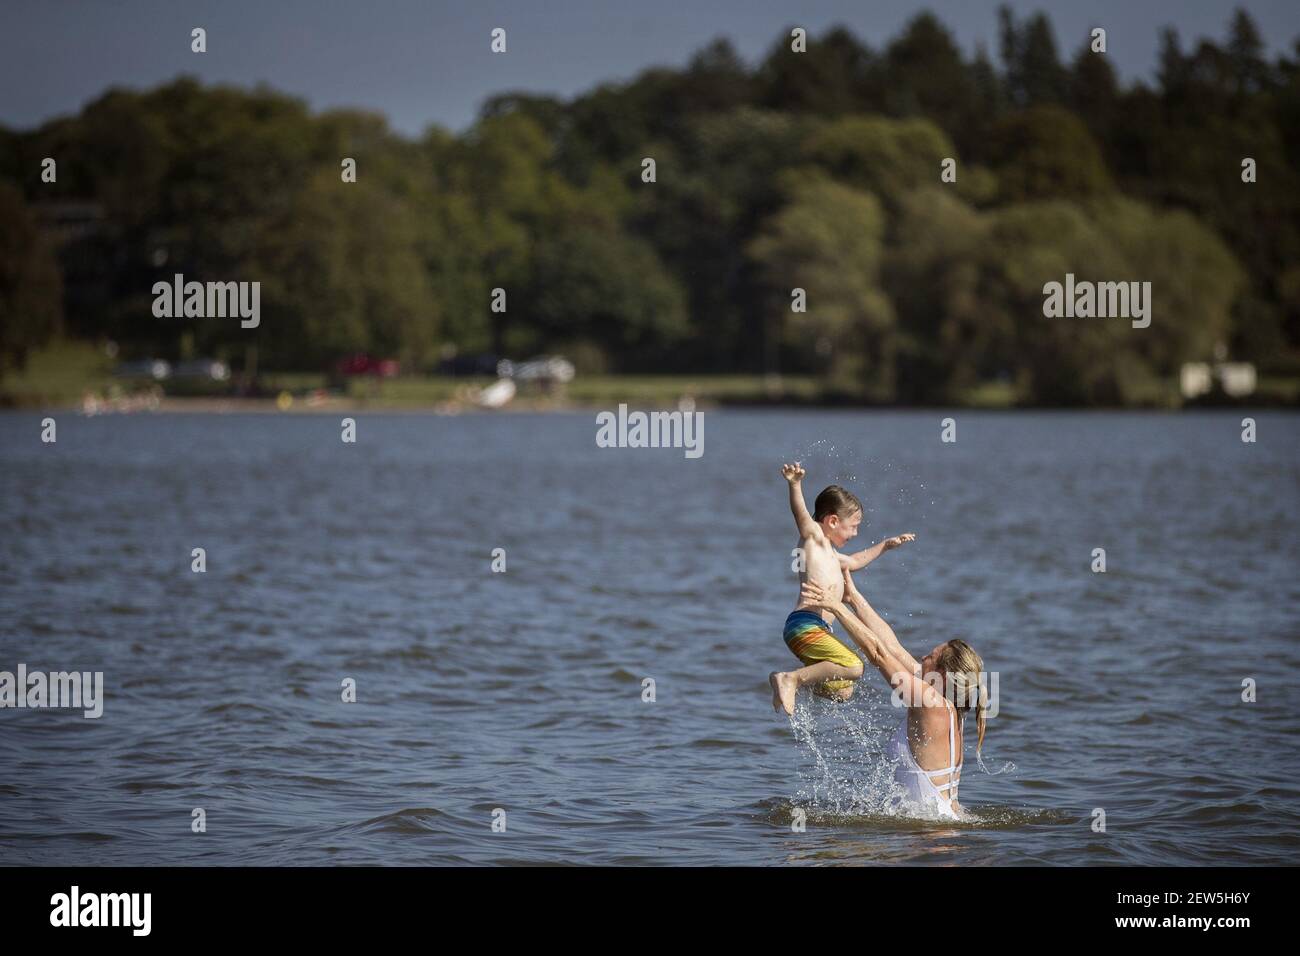 Willow Anderson throws up her son Henrik, 5, into the air in Lake Nokomis on the first day of autumn, Friday, Sept. 22, 2017 in Minneapolis, Minn. Highs were in the 90's, and the heat index reached 100 degrees. (Photo by Leila Navidi/Minneapolis Star Tribune/TNS/Sipa USA) Stock Photo